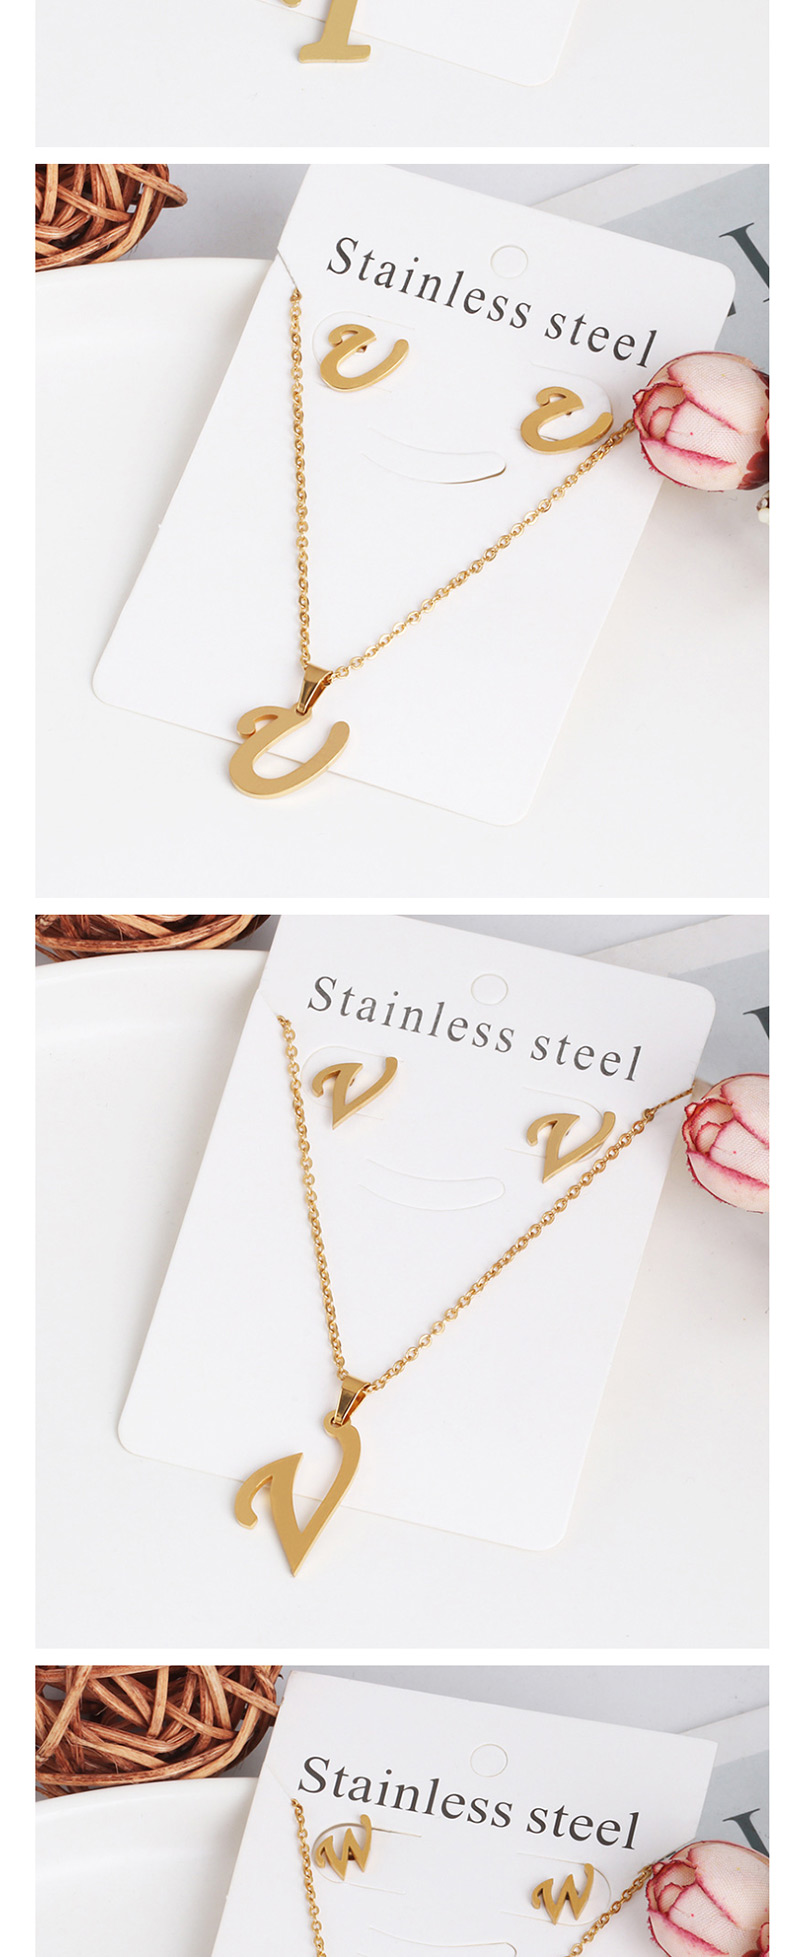 Fashion P Gold Stainless Steel Letter Necklace Earrings Two-piece,Jewelry Sets